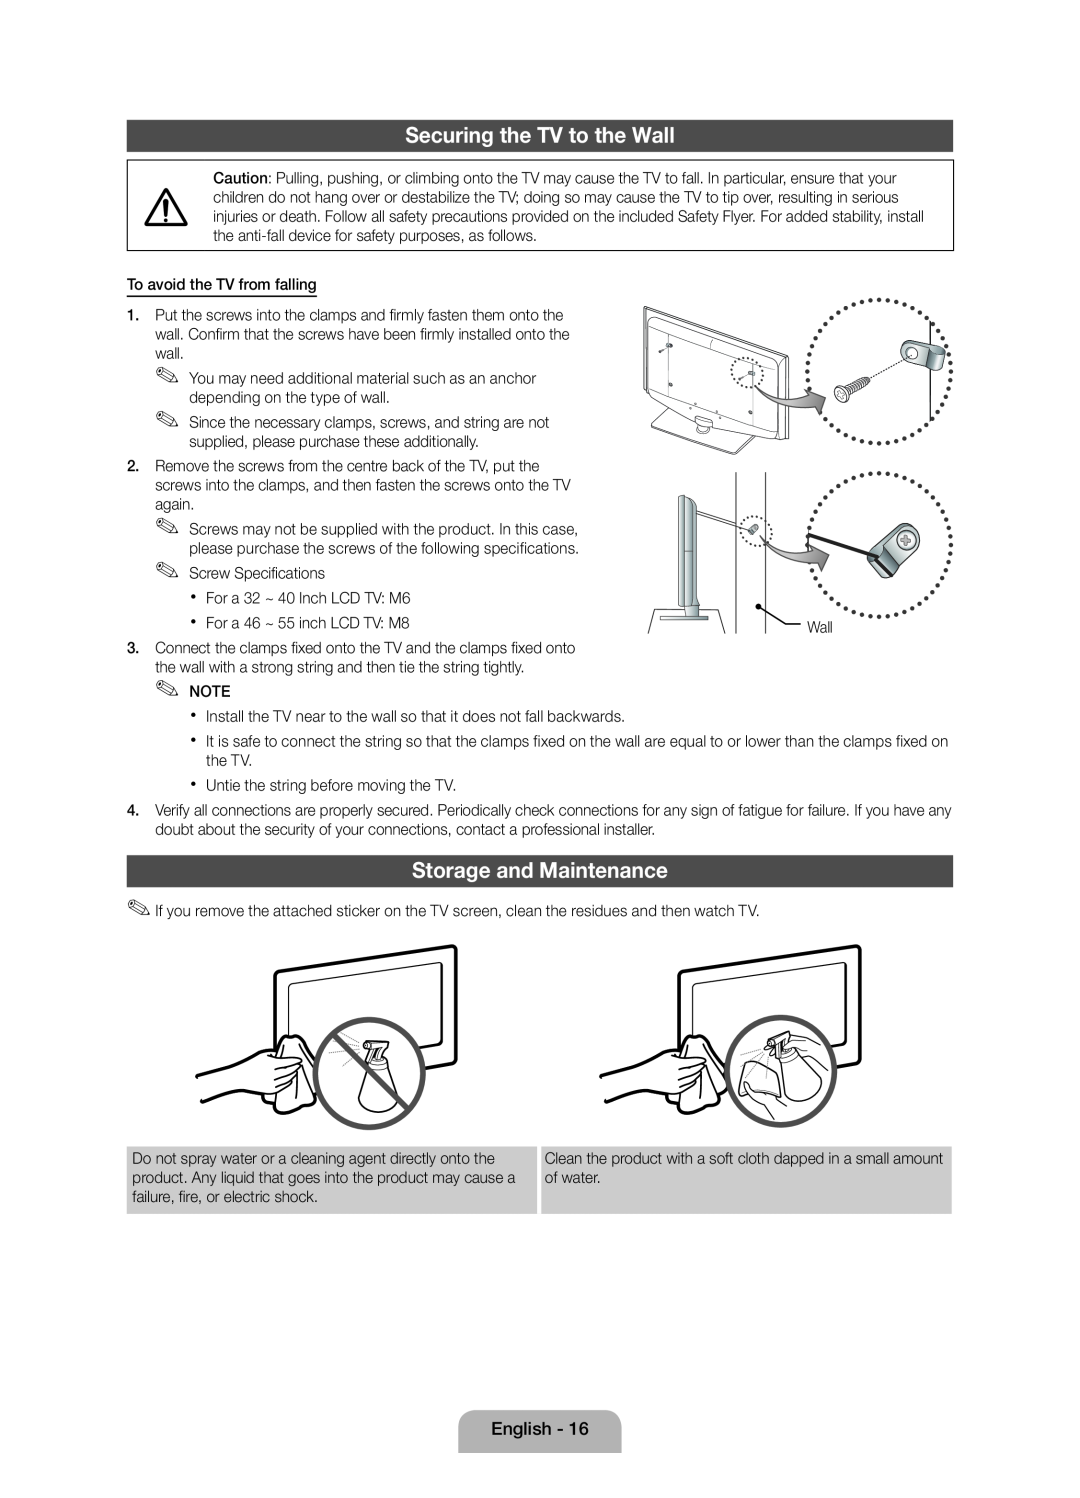 Samsung Series 5 user manual Securing the TV to the Wall, Storage and Maintenance 